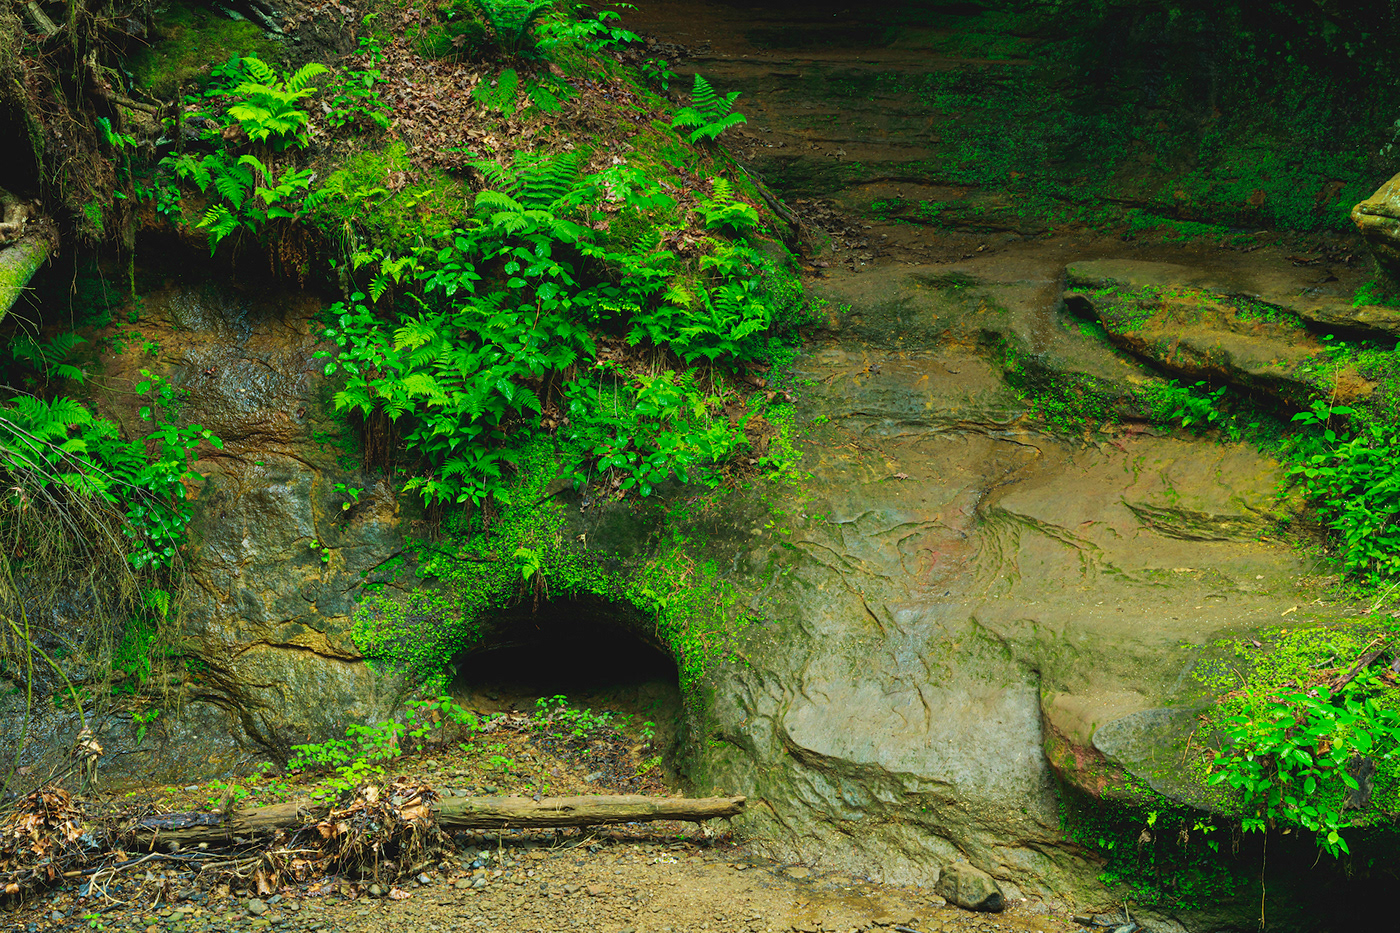 caverns forest hocking hills state park lush green may 2021 ohio wilderness Rock Face sand stone trails Waterfalls